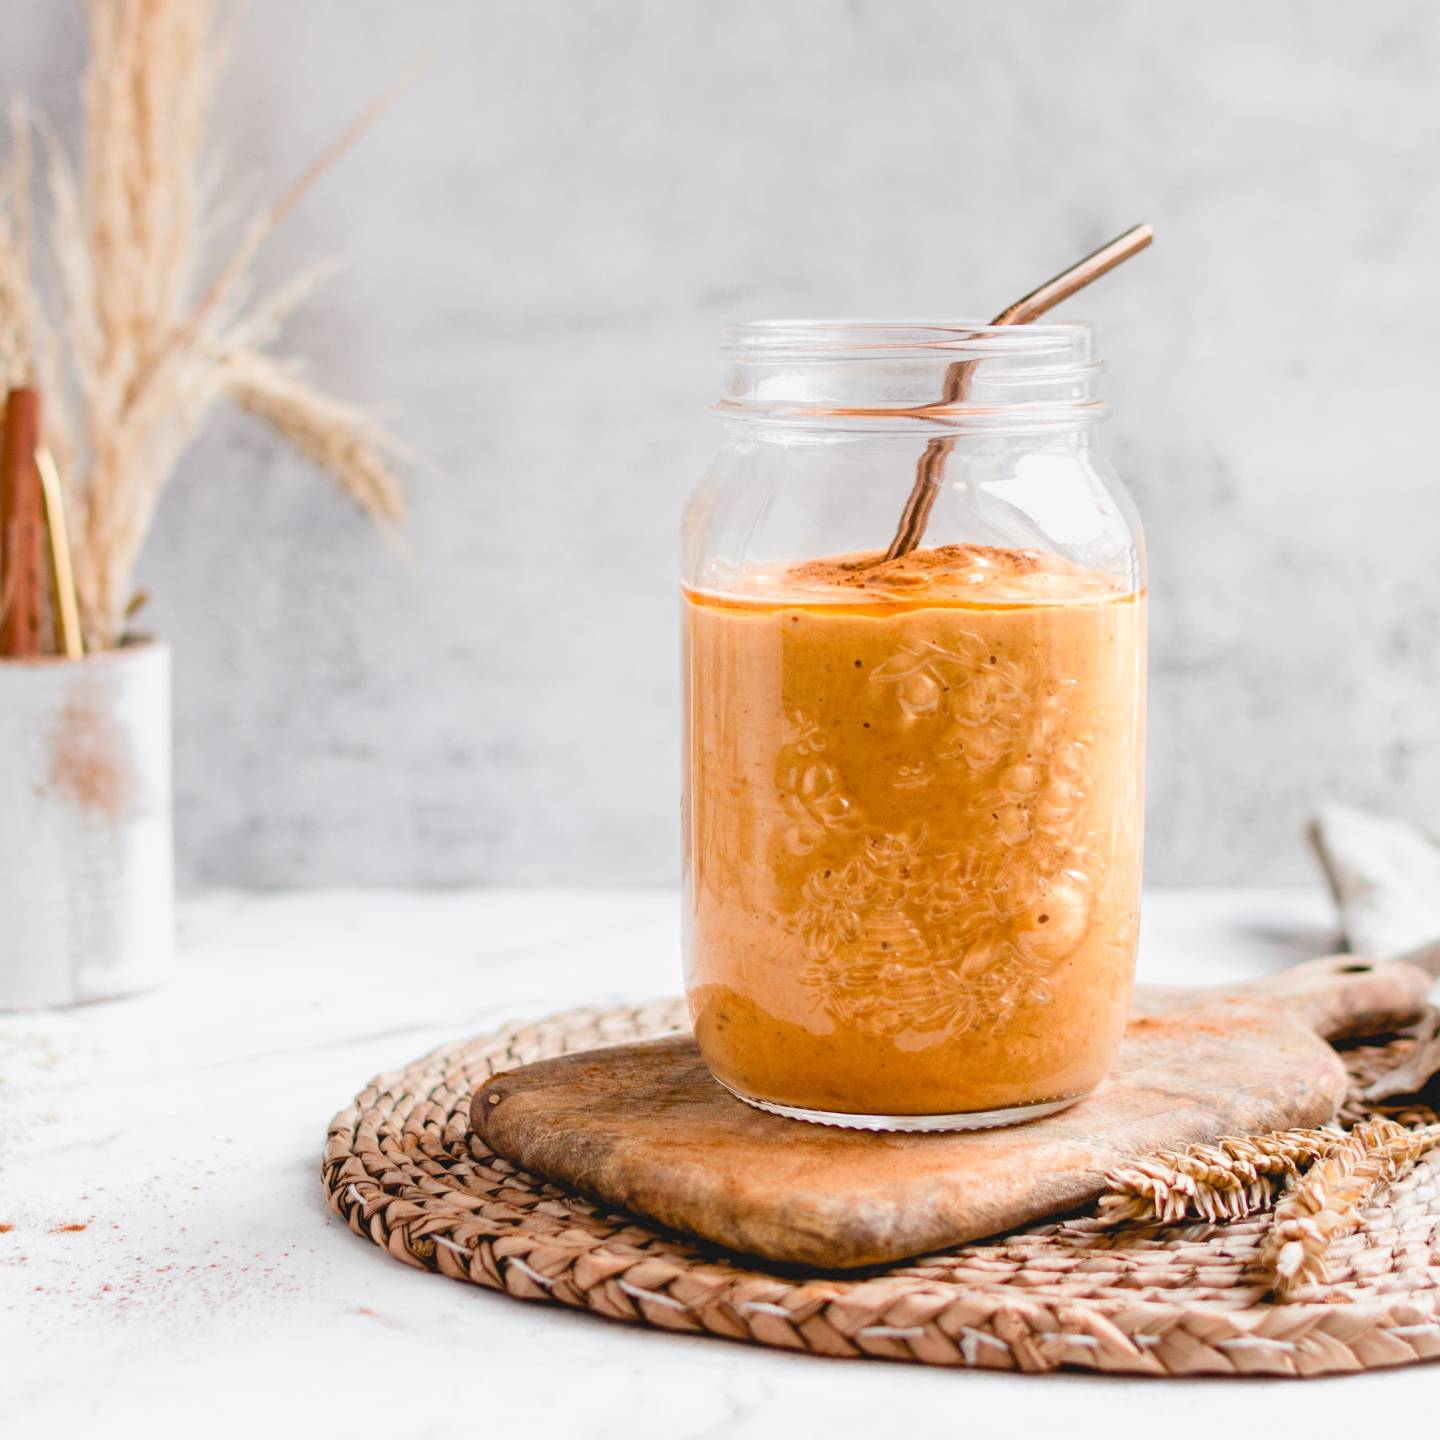 Pumpkin pie smoothie with canned pumpkin, pumpkin spice, almond milk, dates, and oats blended and served in a glass.